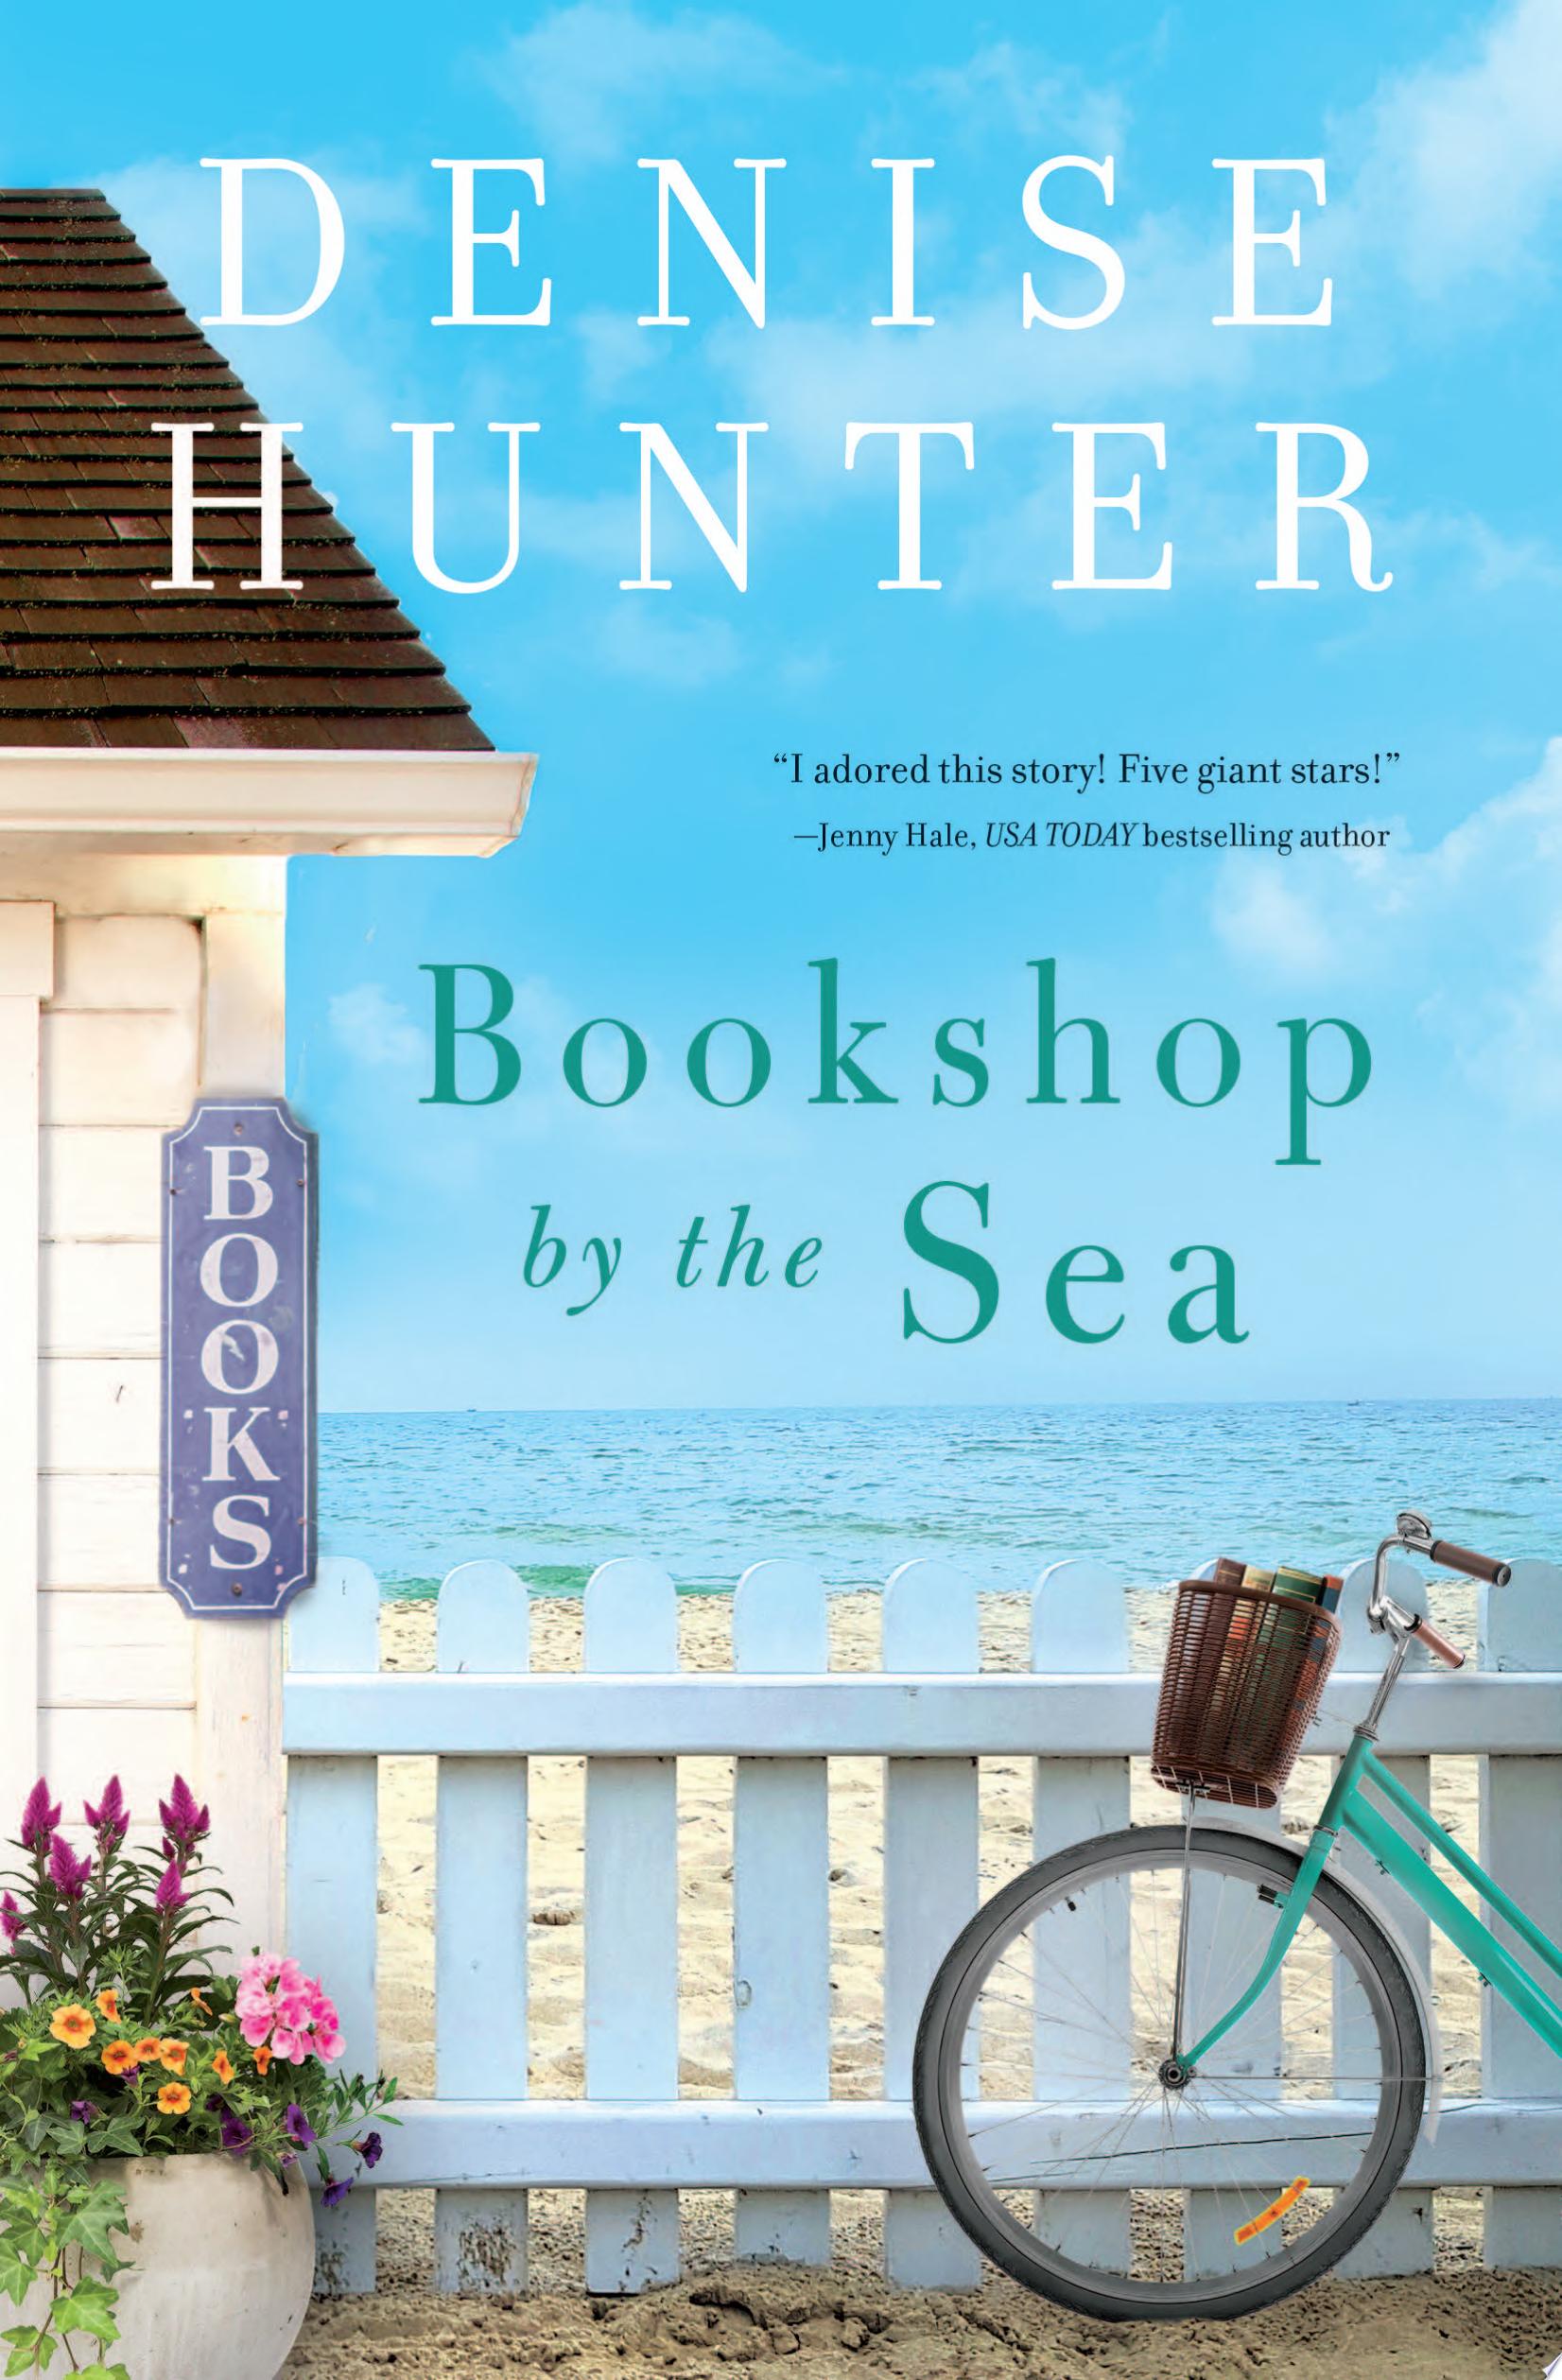 Image for "Bookshop by the Sea"